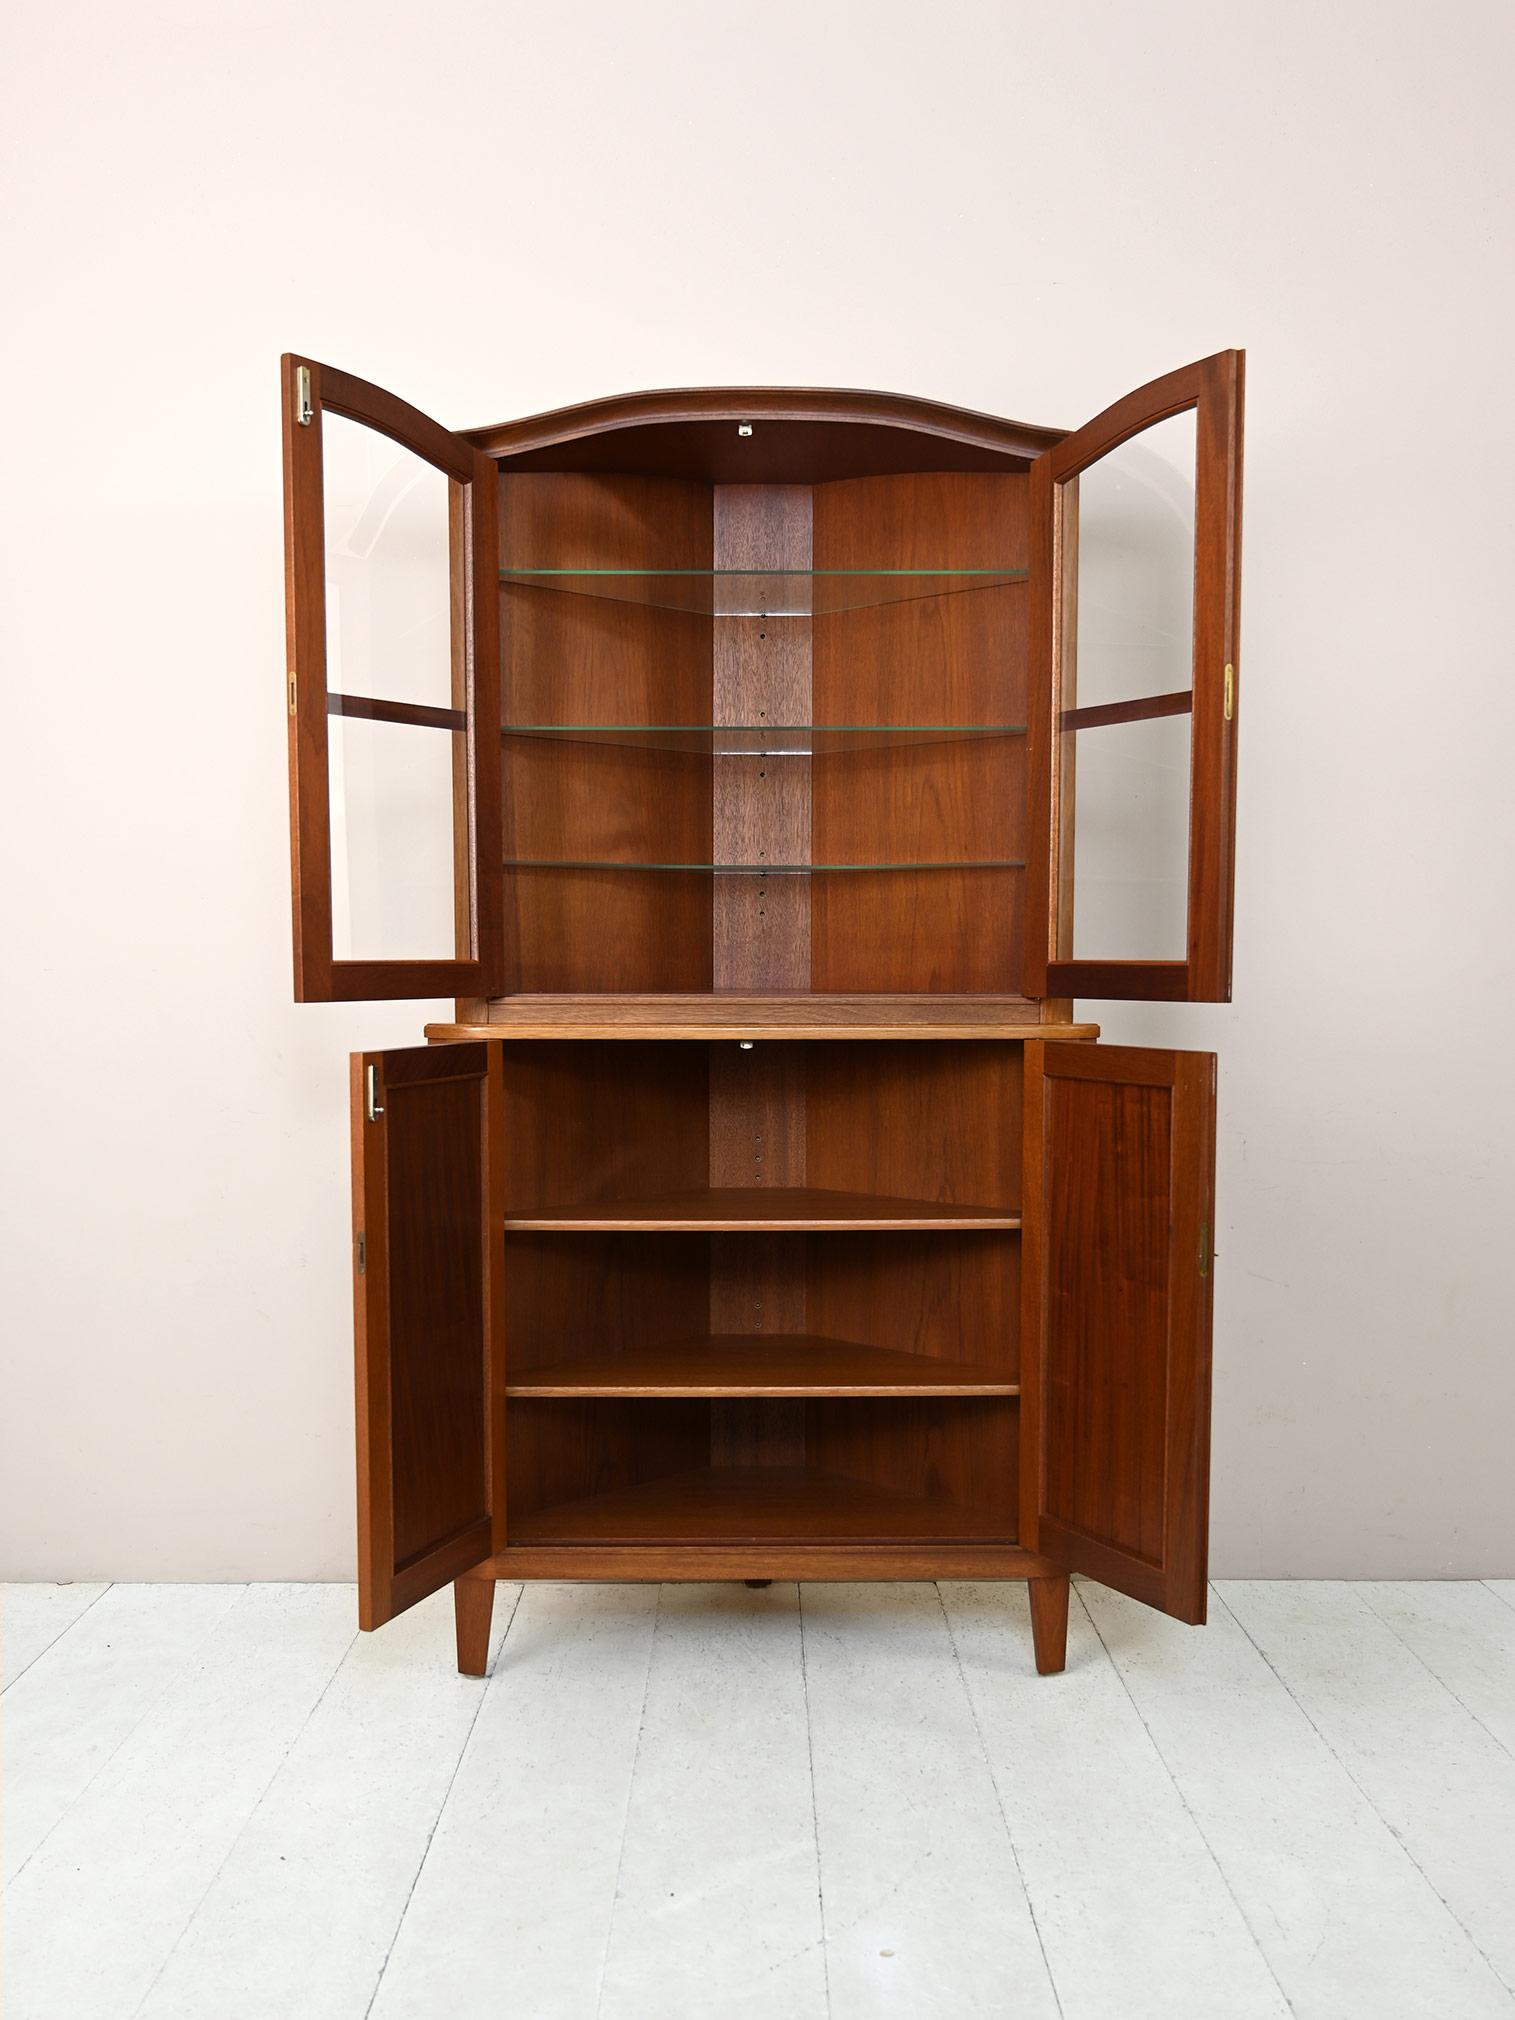 Vintage two-body teak corner cabinet.

An iconic Scandinavian 1960s design furniture piece.
The lower part is a storage compartment with hinged doors, and the upper part consists of glass shelving and is closed by a lockable cabinet.
Sophisticated